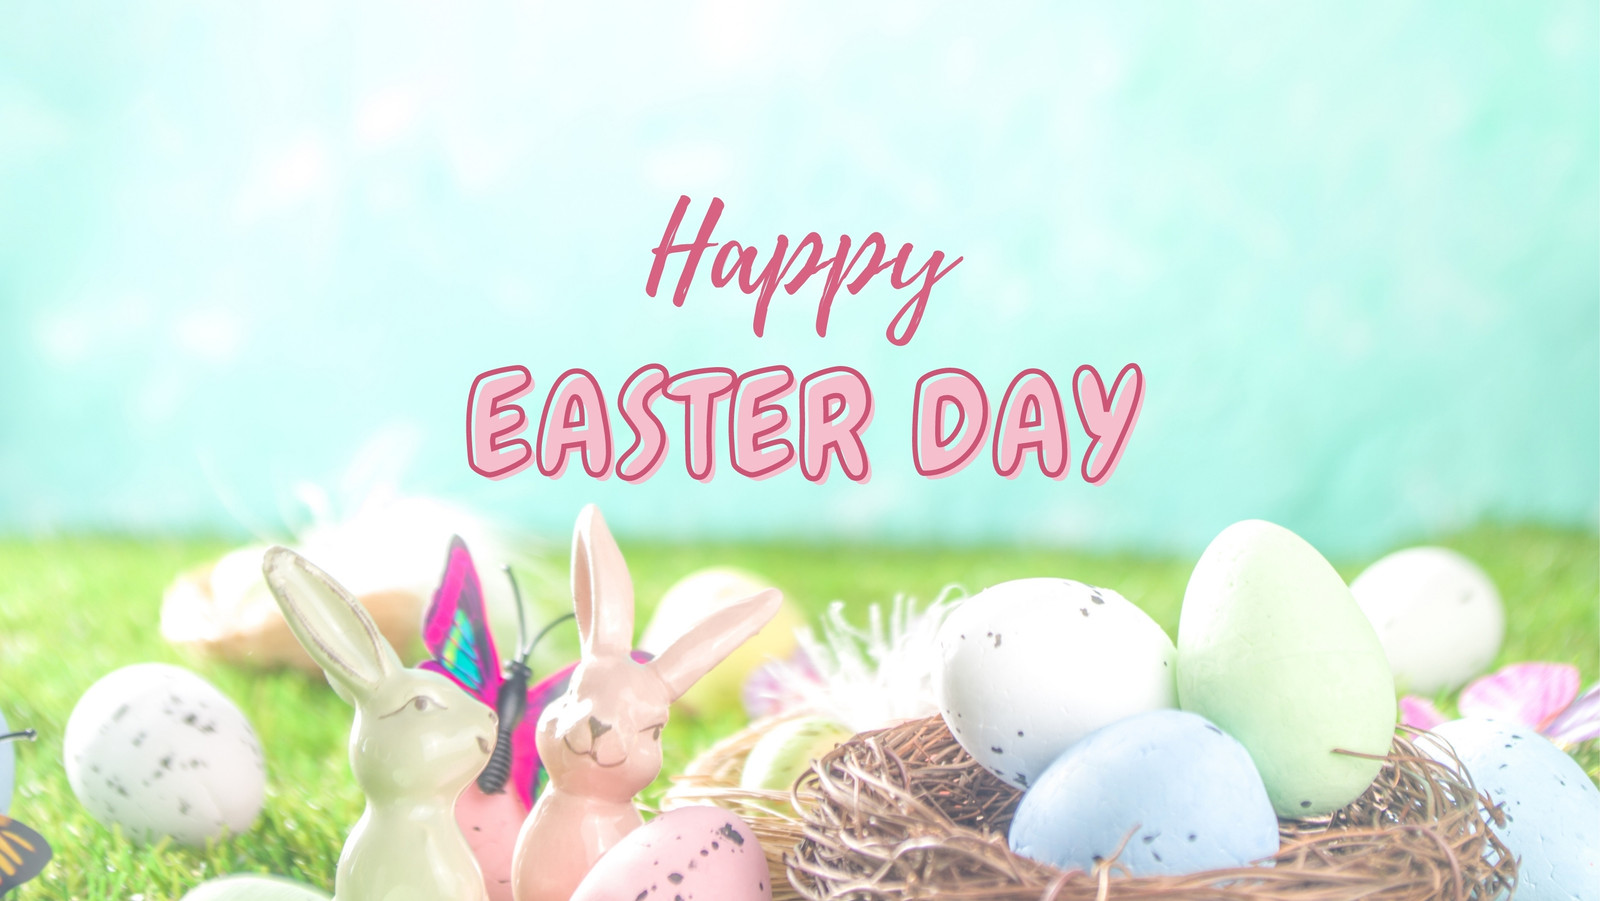 Page 4 - Free and customizable easter bunny templates